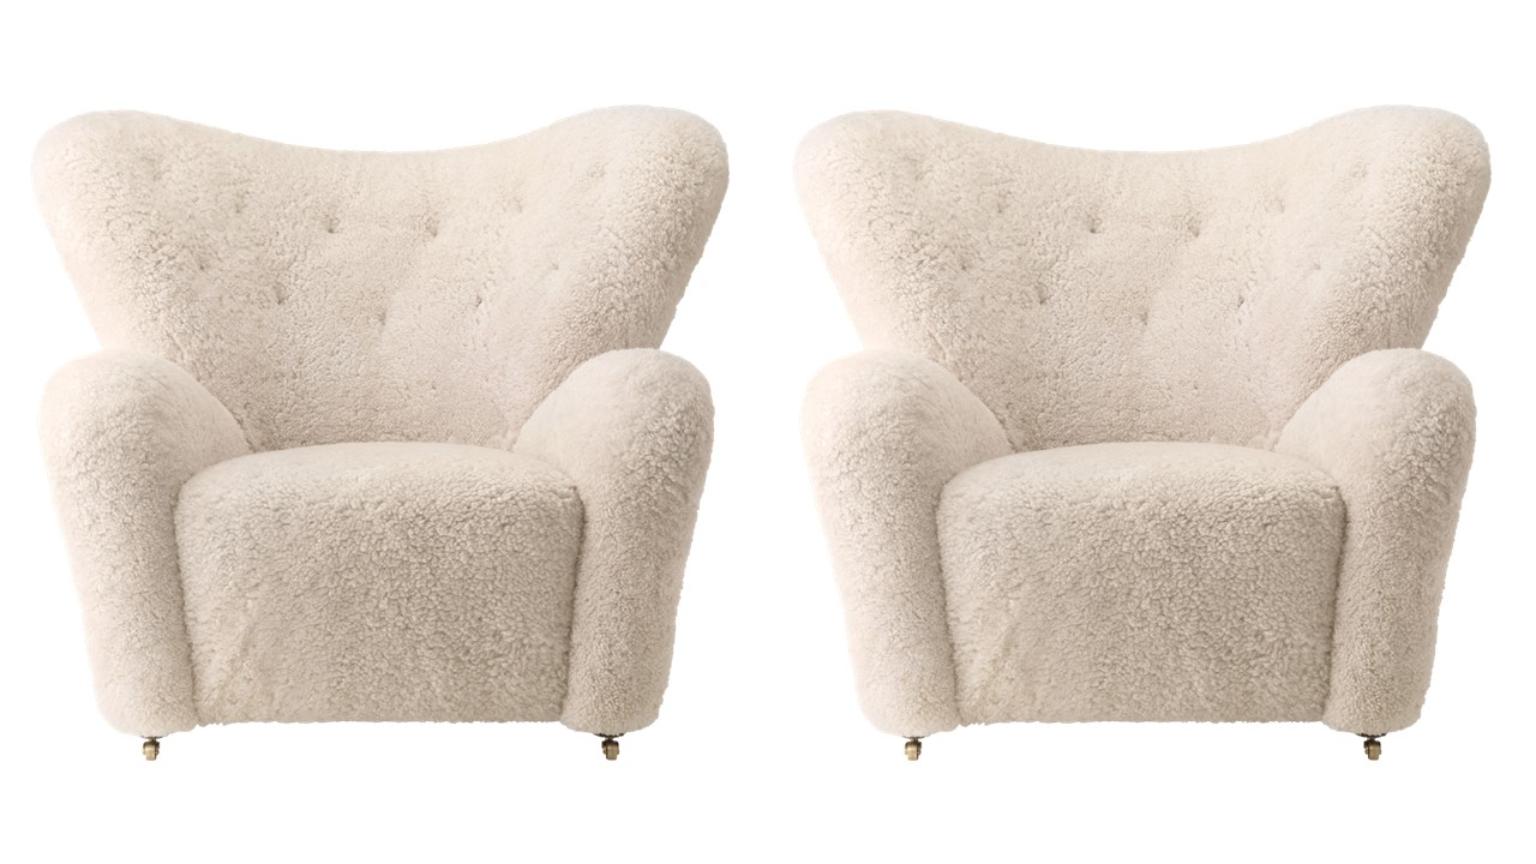 Set of 2 moonlight sheepskin the tired man lounge chair by Lassen.
Dimensions: W 102 x D 87 x H 88 cm. 
Materials: Sheepskin.

Flemming Lassen designed the overstuffed easy chair, The Tired Man, for The Copenhagen Cabinetmakers’ Guild